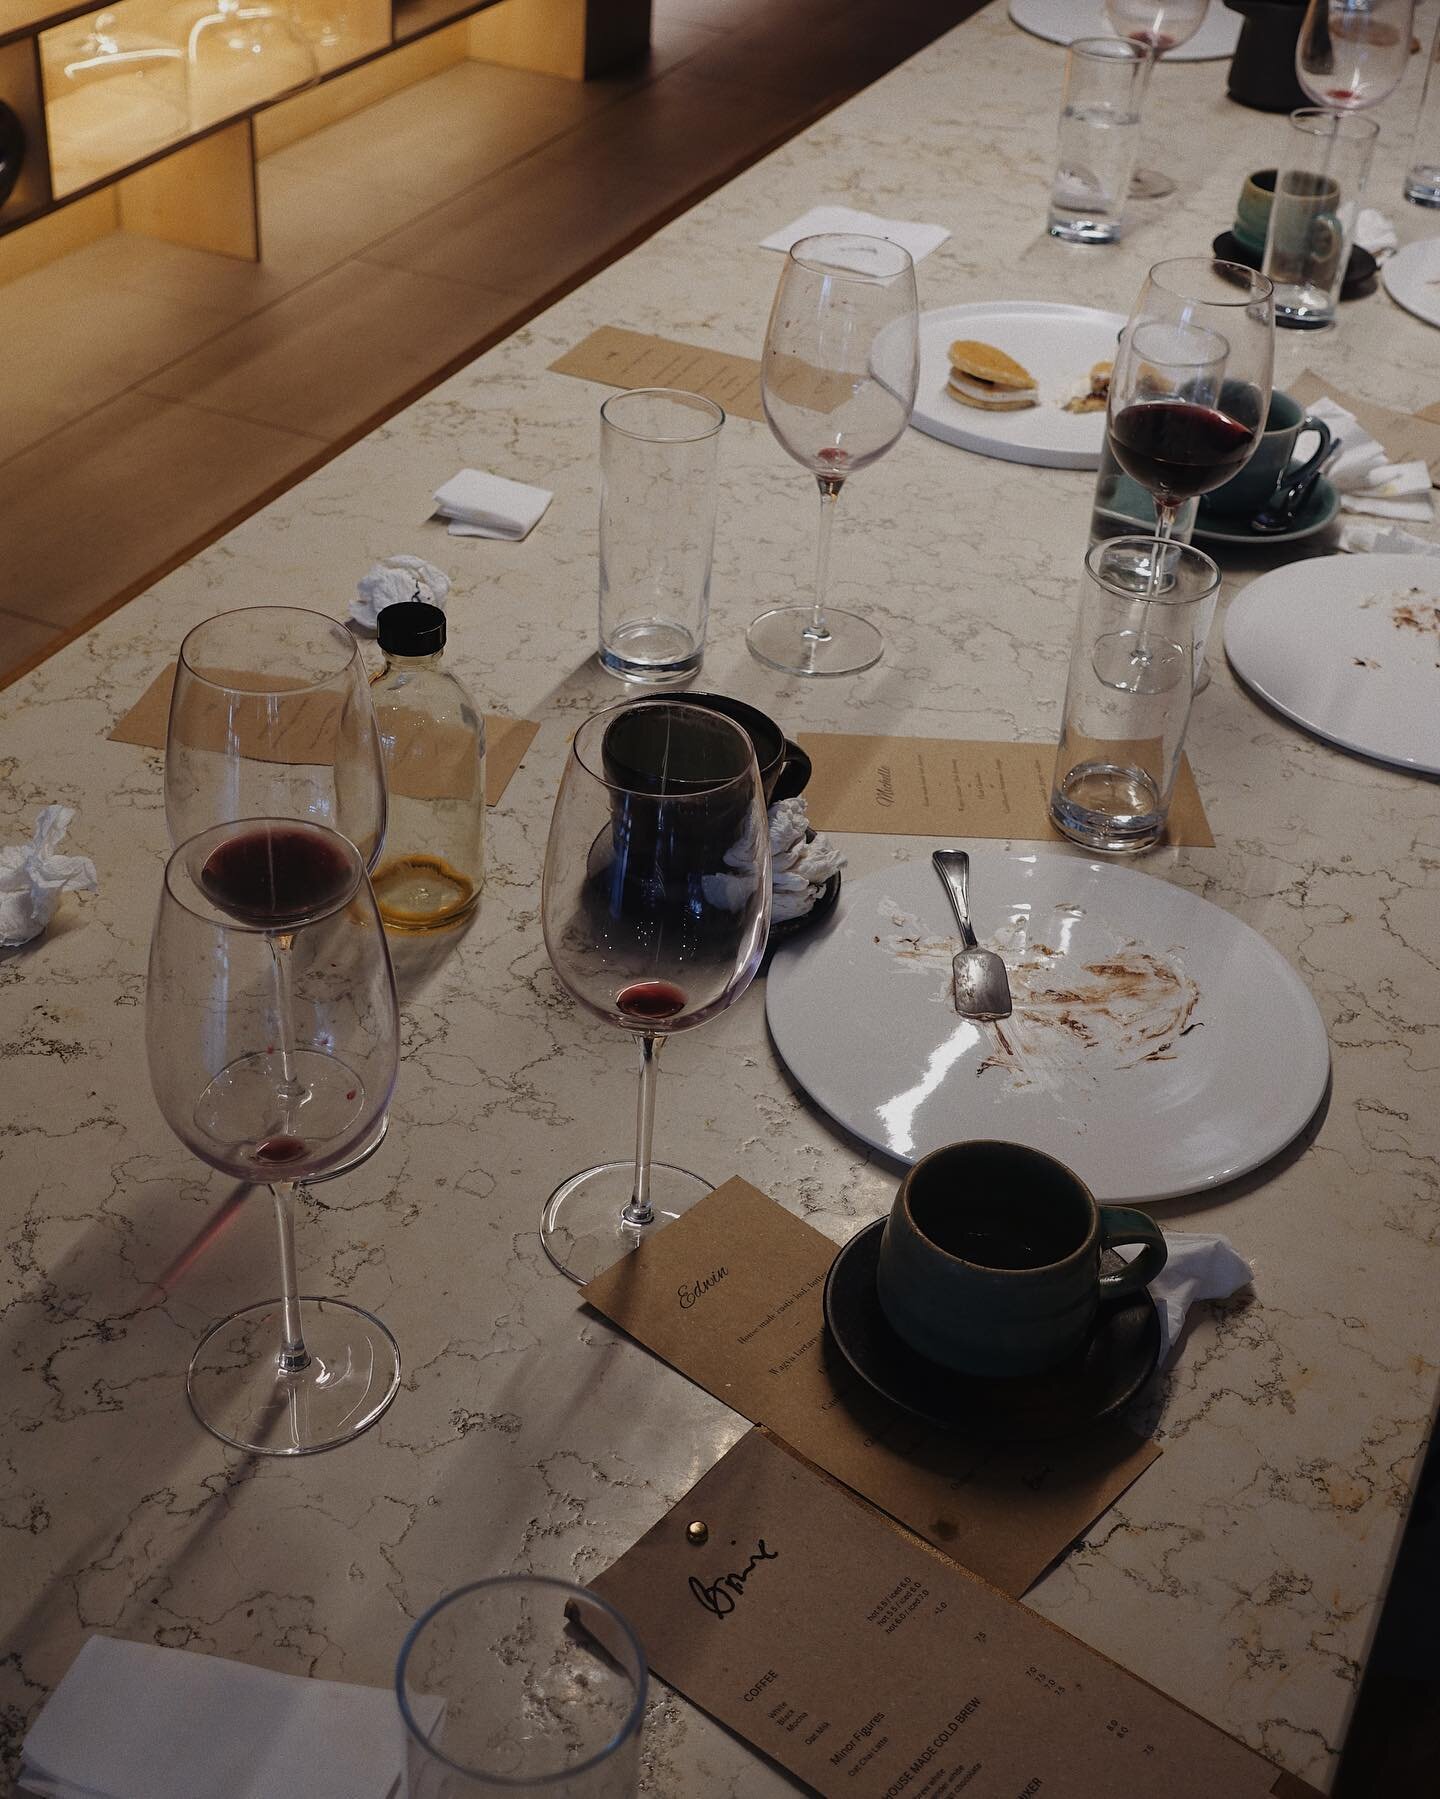 The Aftermath &mdash; A night of good food, good wine, and even better company